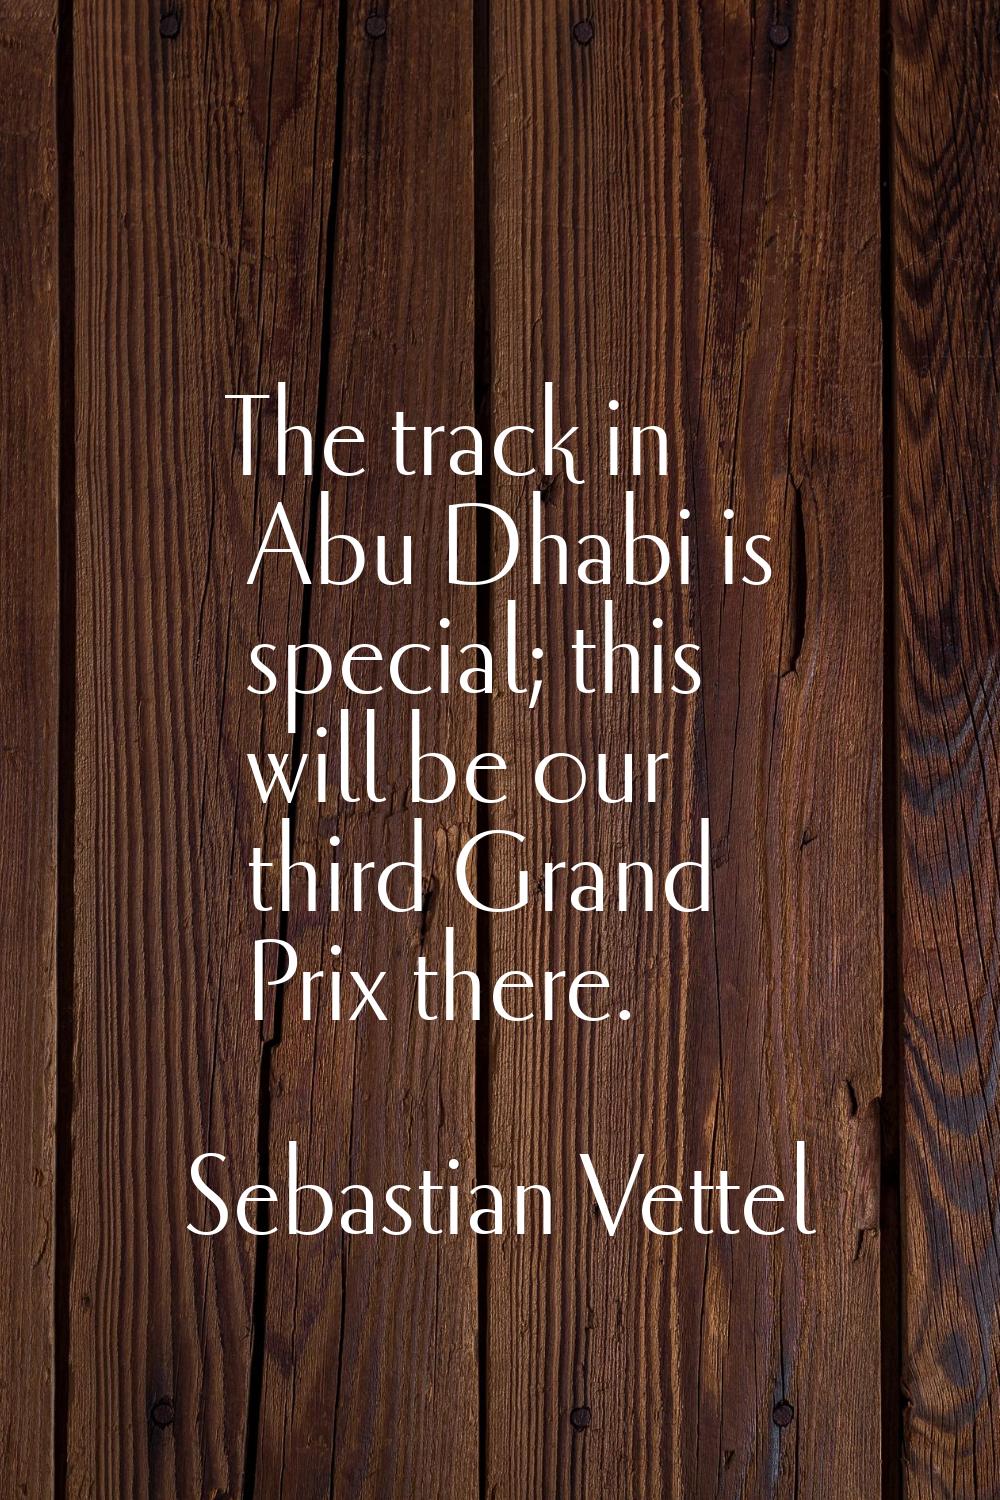 The track in Abu Dhabi is special; this will be our third Grand Prix there.